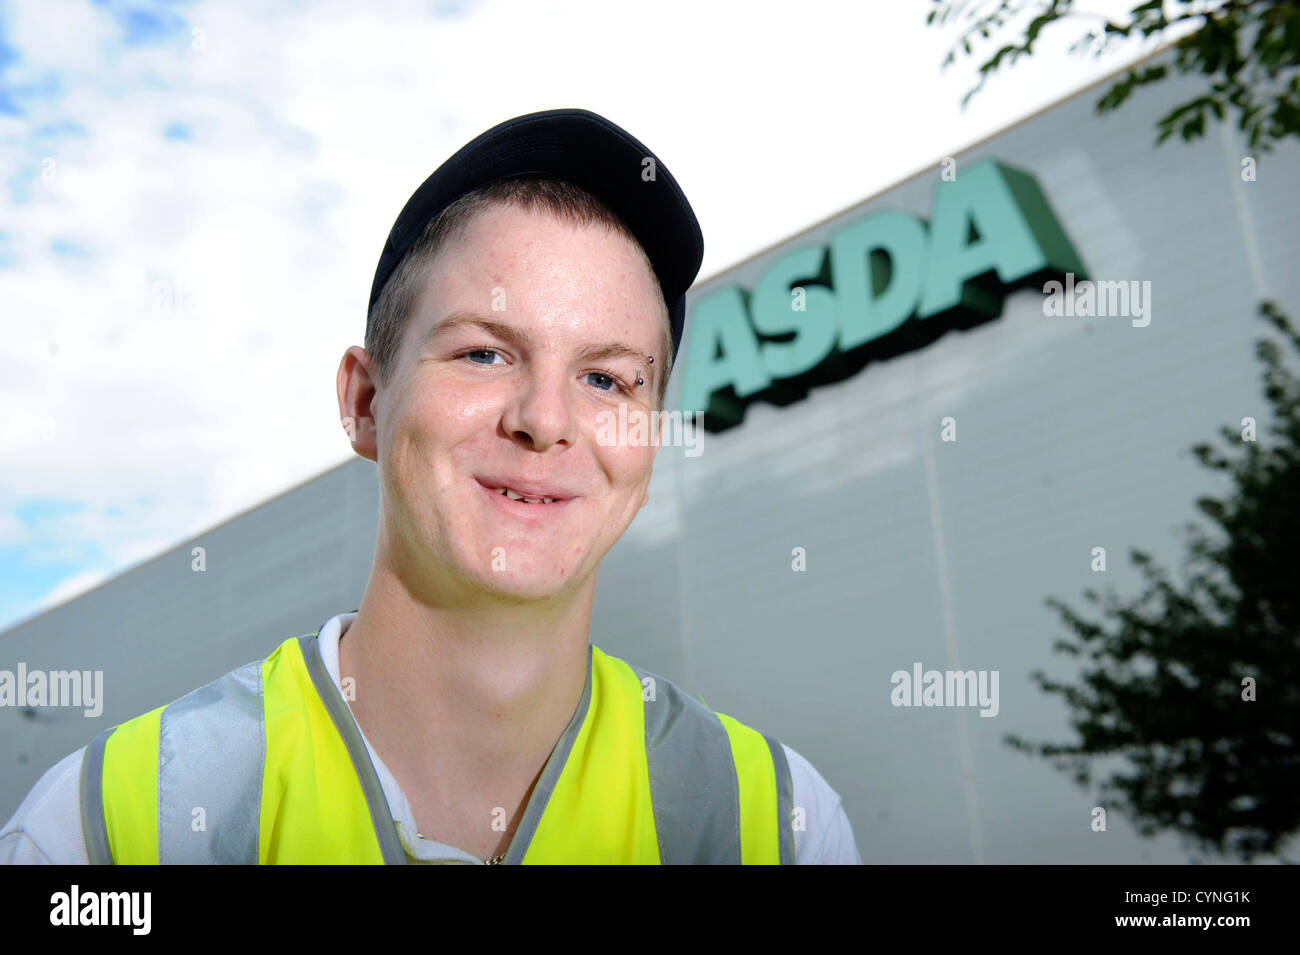 A young employee of the Asda supermarket working as an Order Picker at Asda Bristol Chilled Distribution Centre UK Stock Photo